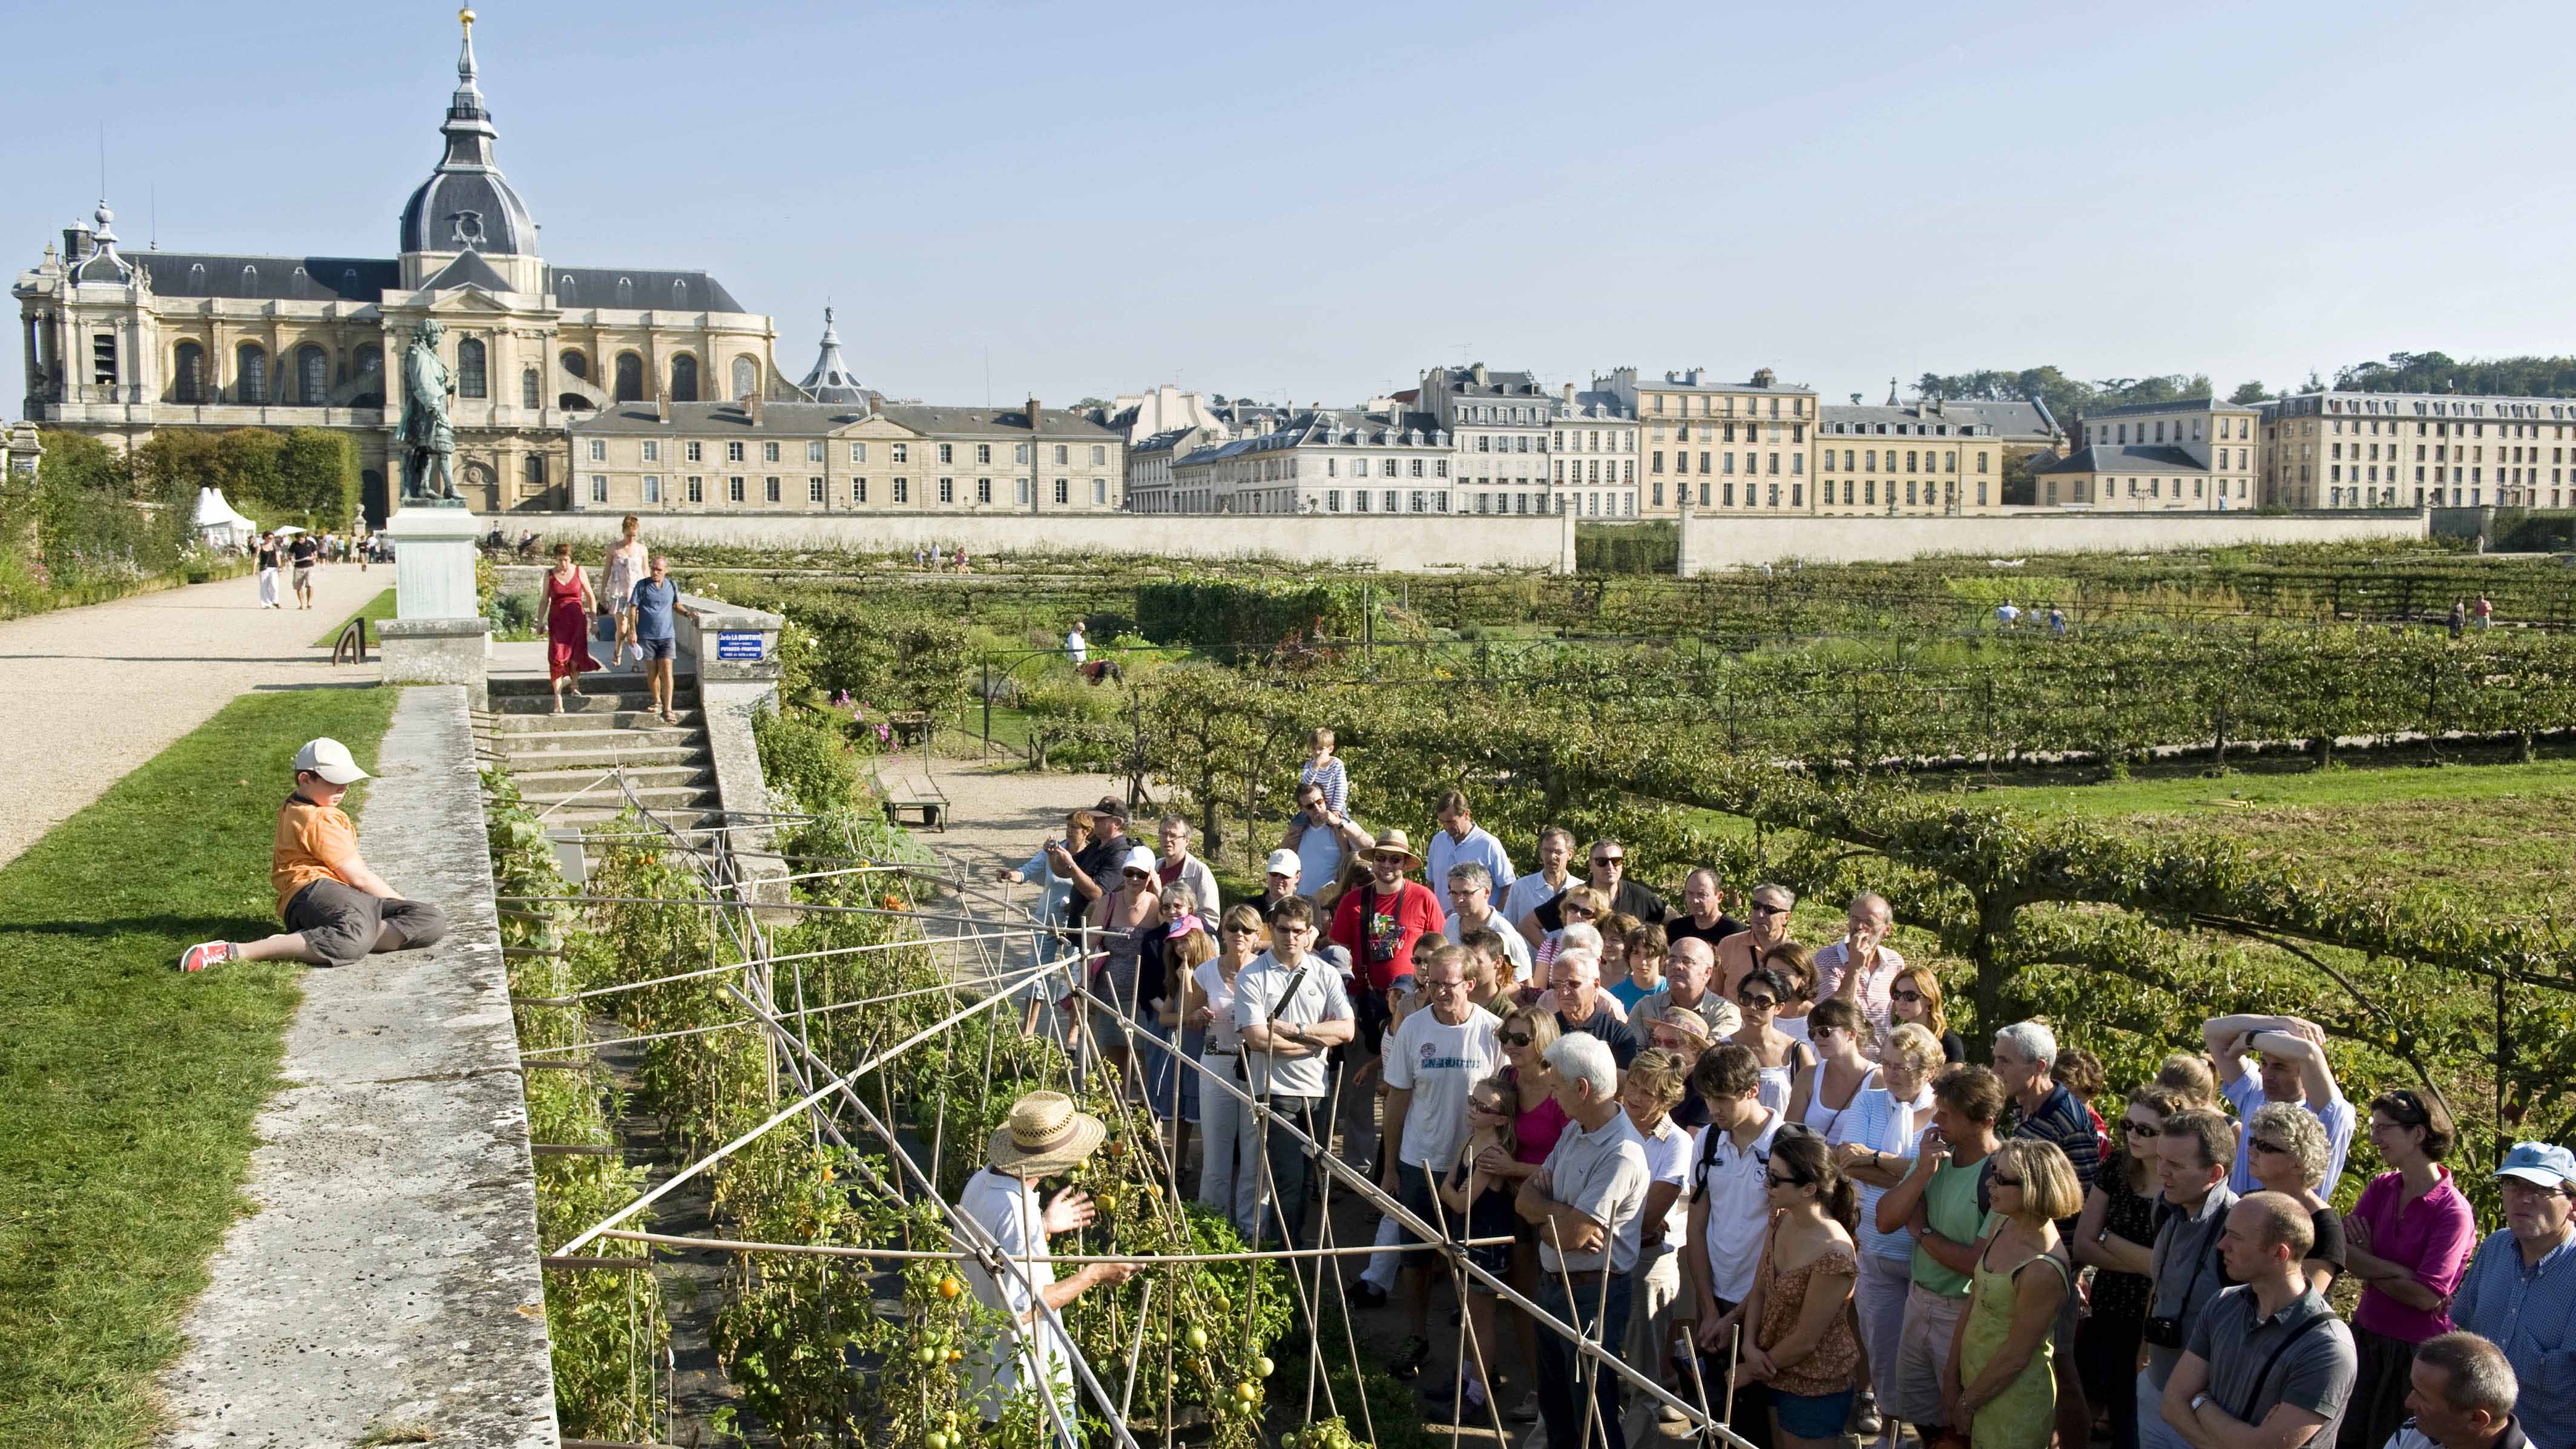 View of the Potager du Roi, the kitchen gardens of the Palace of Versailles, France. Photo credit: Sylvain Duffard.